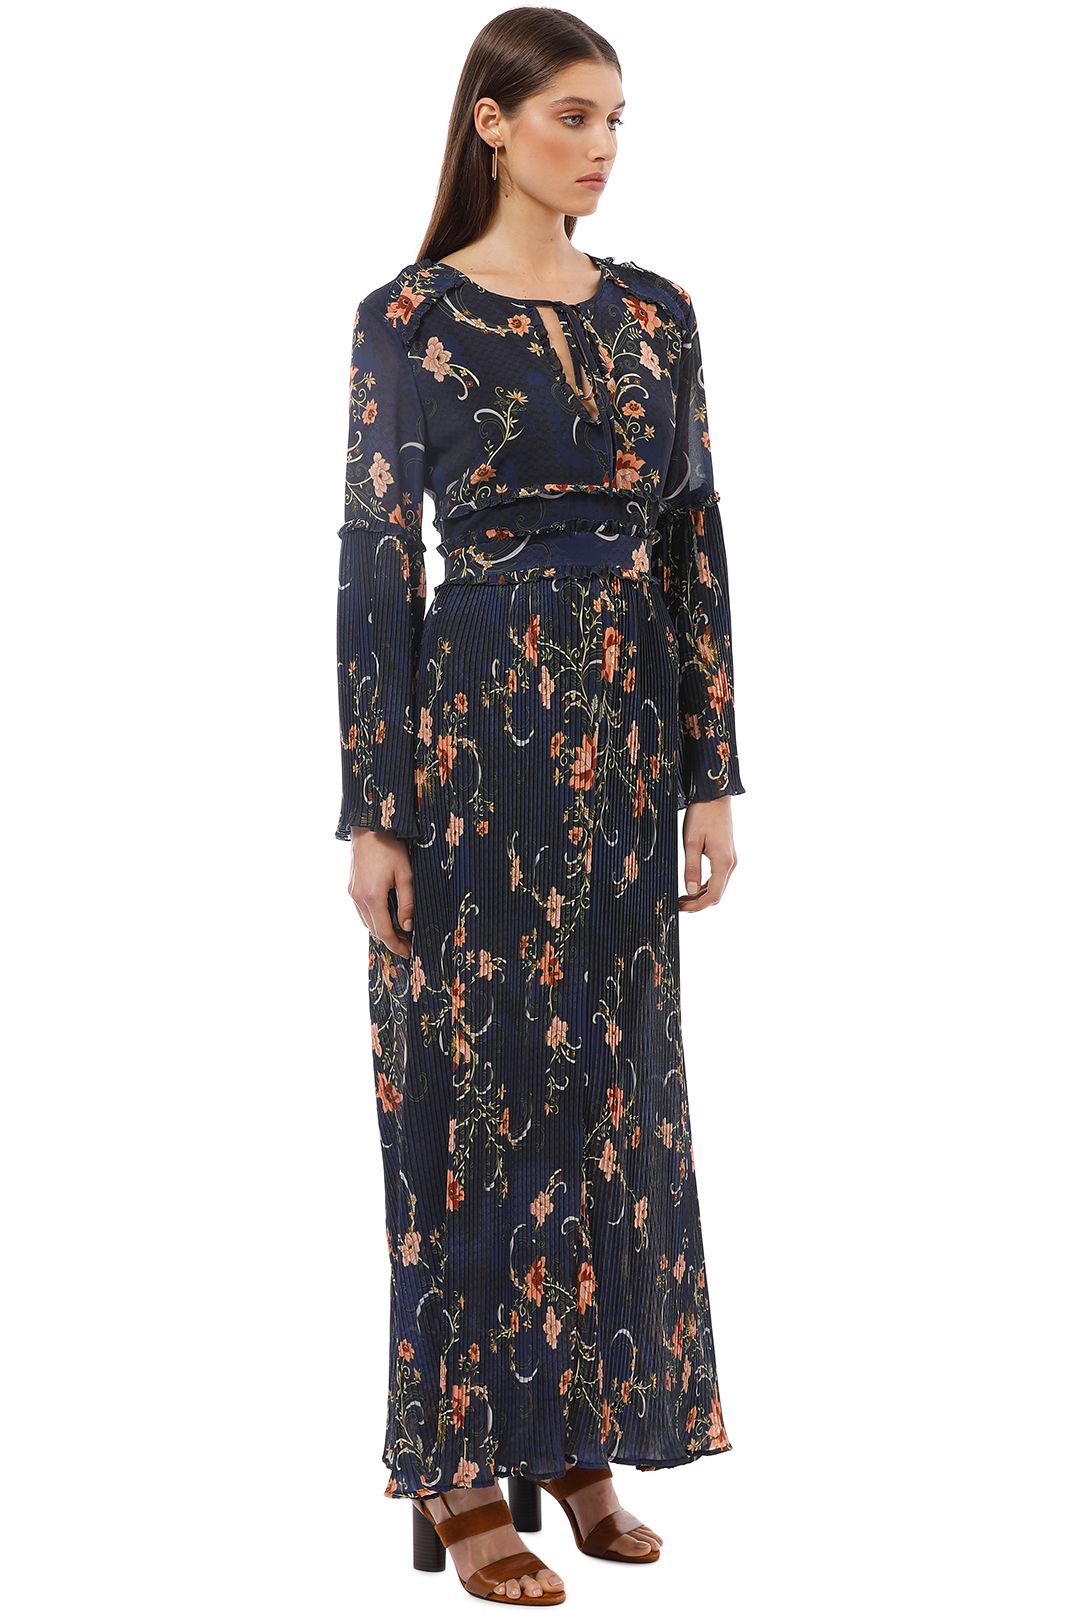 We Are Kindred - Adele Pleated Maxi Dress - Navy Floral - Side